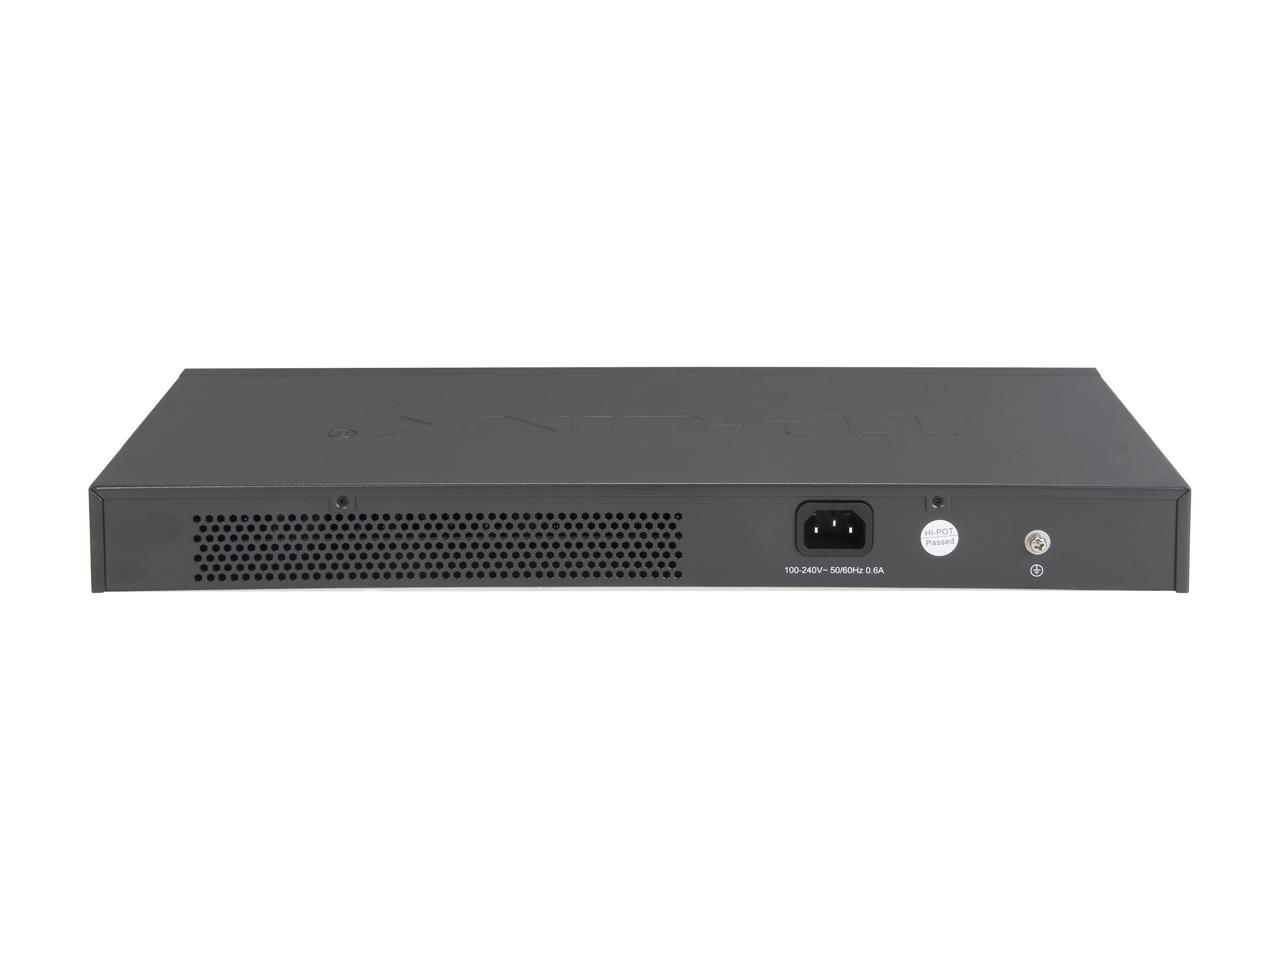 TP-Link 24 Port Gigabit Ethernet Switch | Plug and Play | Sturdy Metal w/Shielded Ports | Rackmount | Fanless | Limited Lifetime Protection | Unmanaged (TL-SG1024) - image 4 of 5